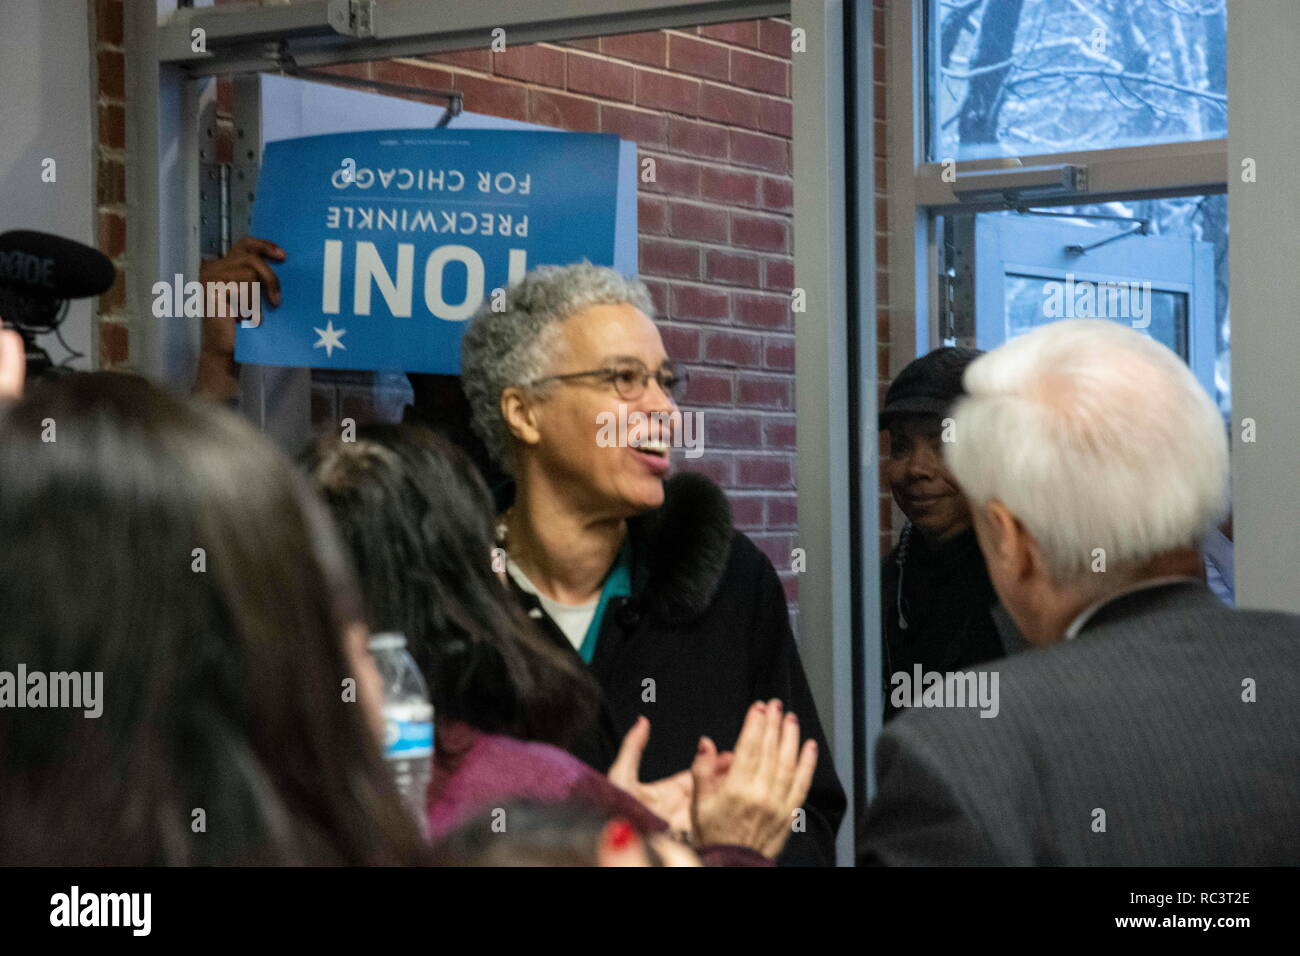 Chicago, Illinios, USA. 12th Jan, 2019. Opening of North side office of Toni Preckwinkle running for mayor of Chicago. Preckwinkle is greeted with applause when she walks through the door. Credit: Karen I. Hirsch/ZUMA Wire/Alamy Live News Stock Photo